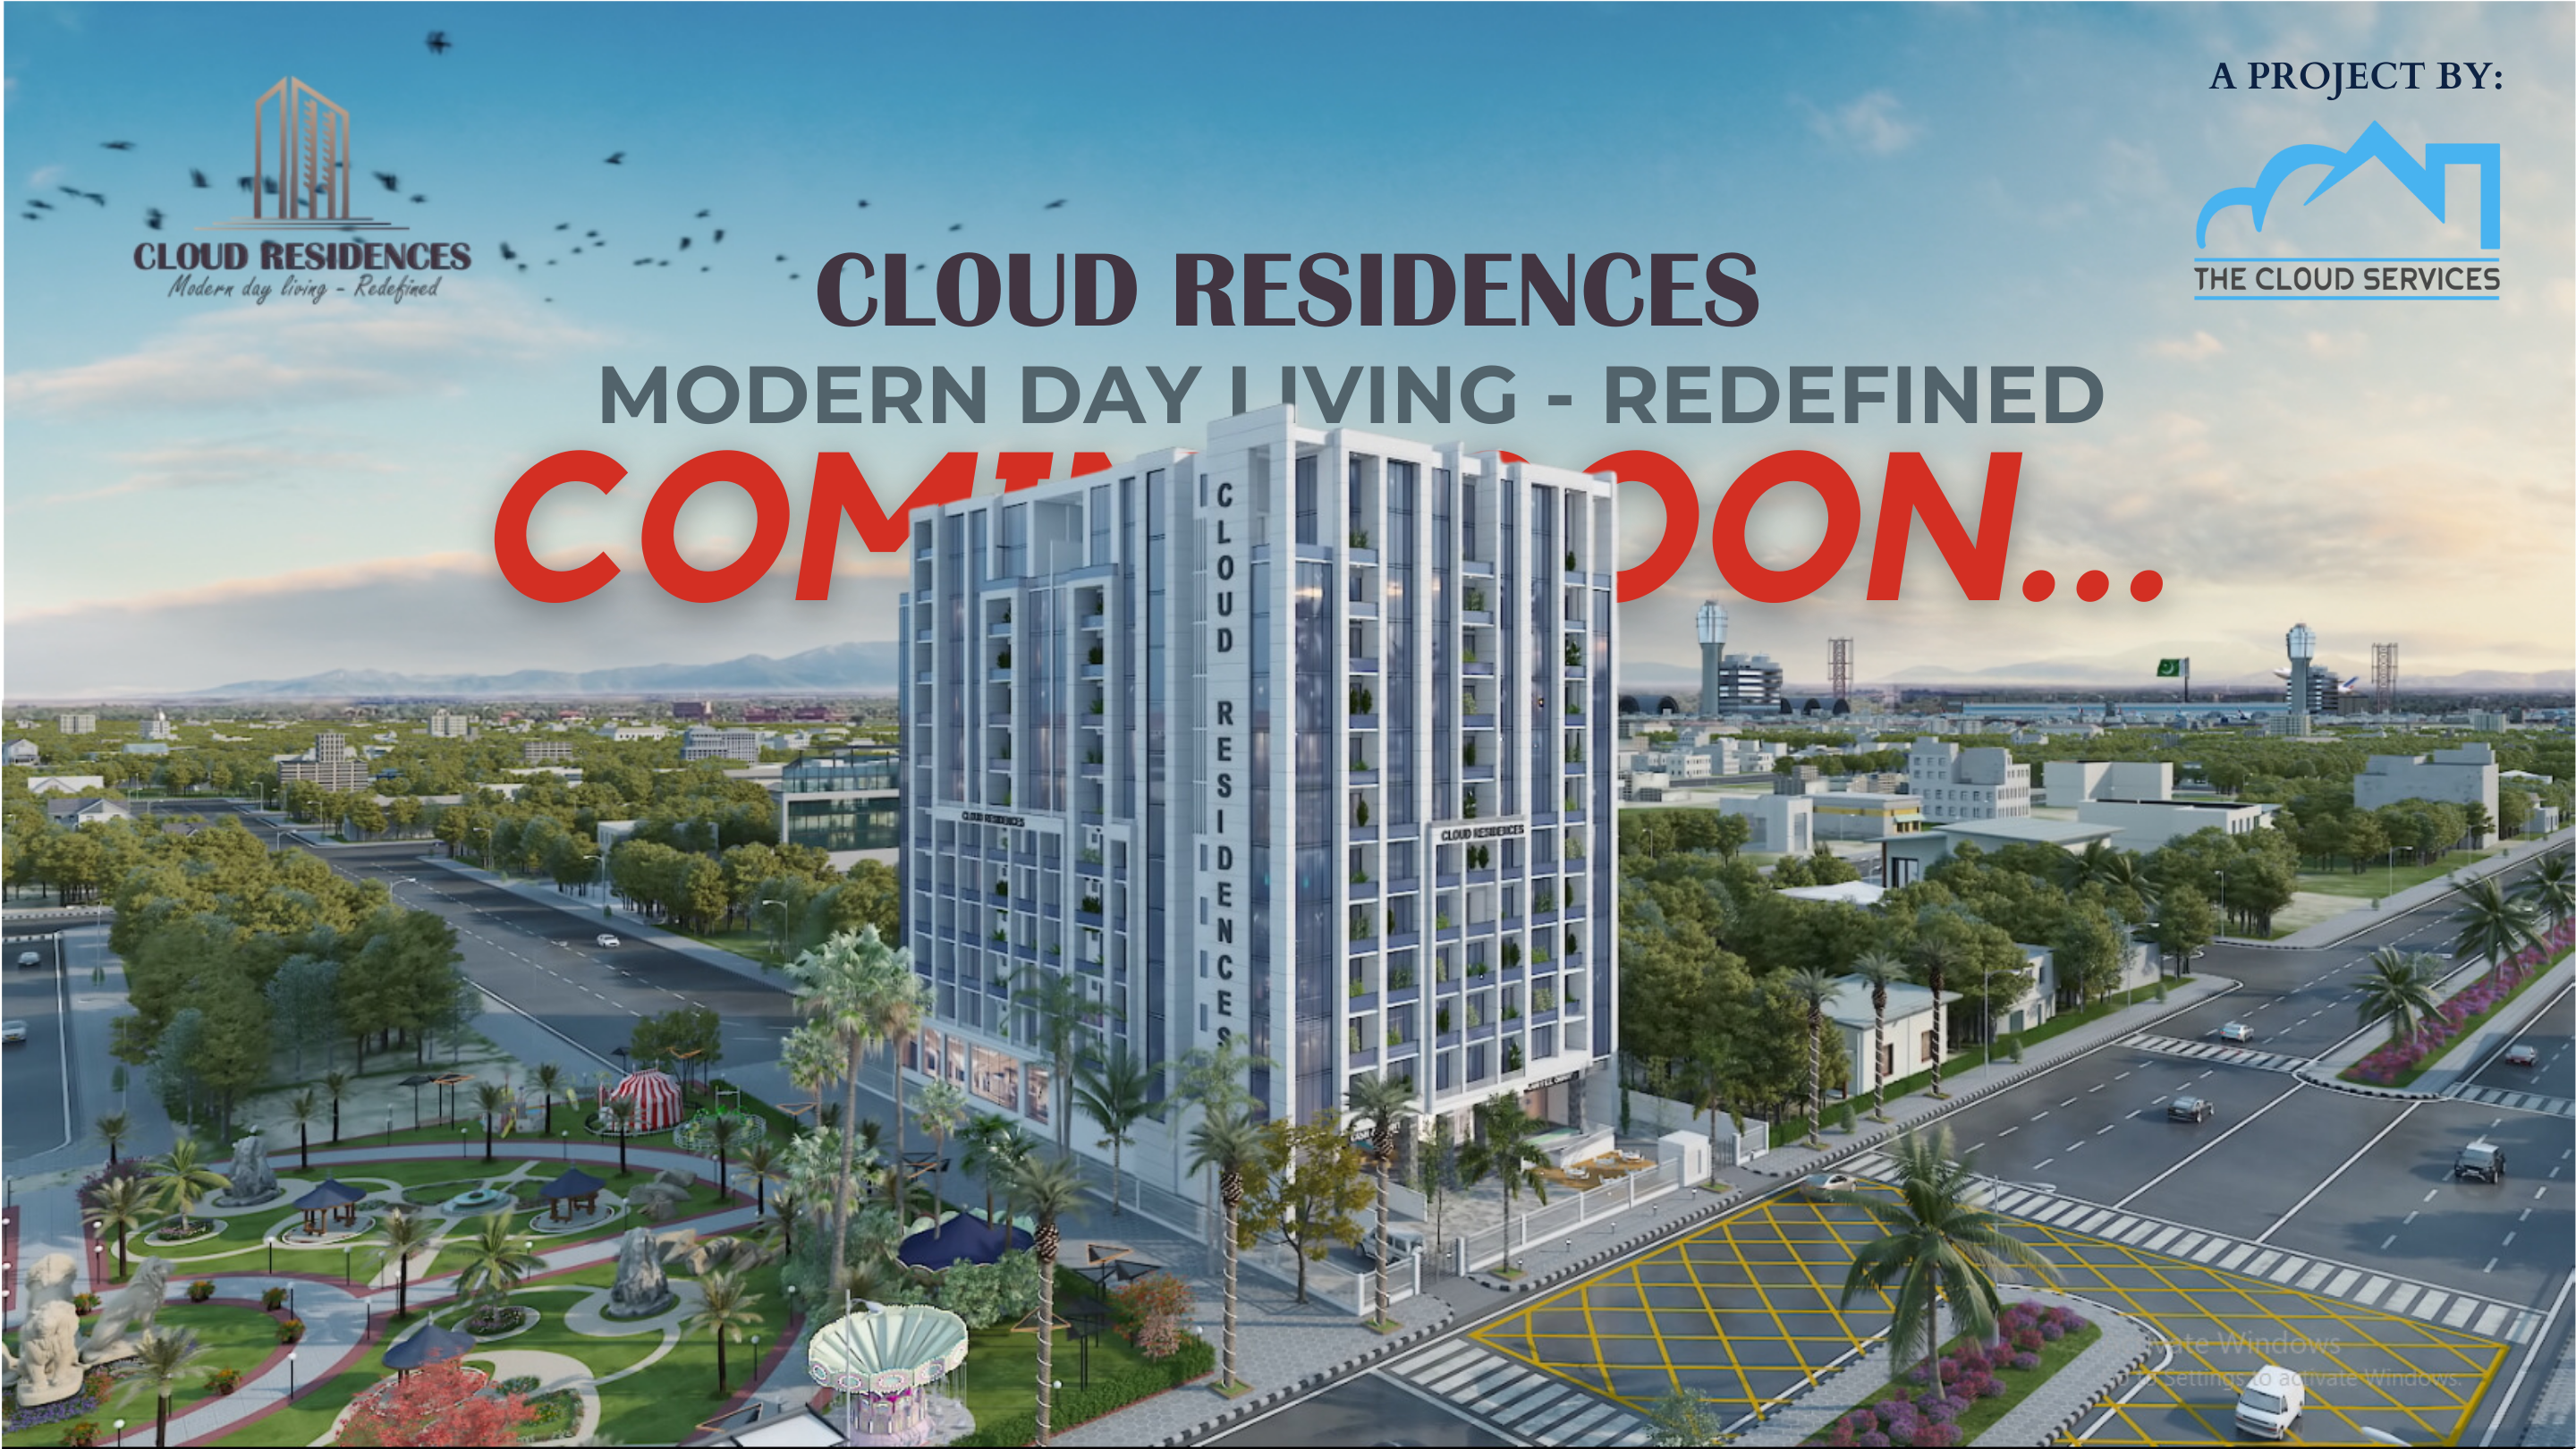 A project of Cloud Residences